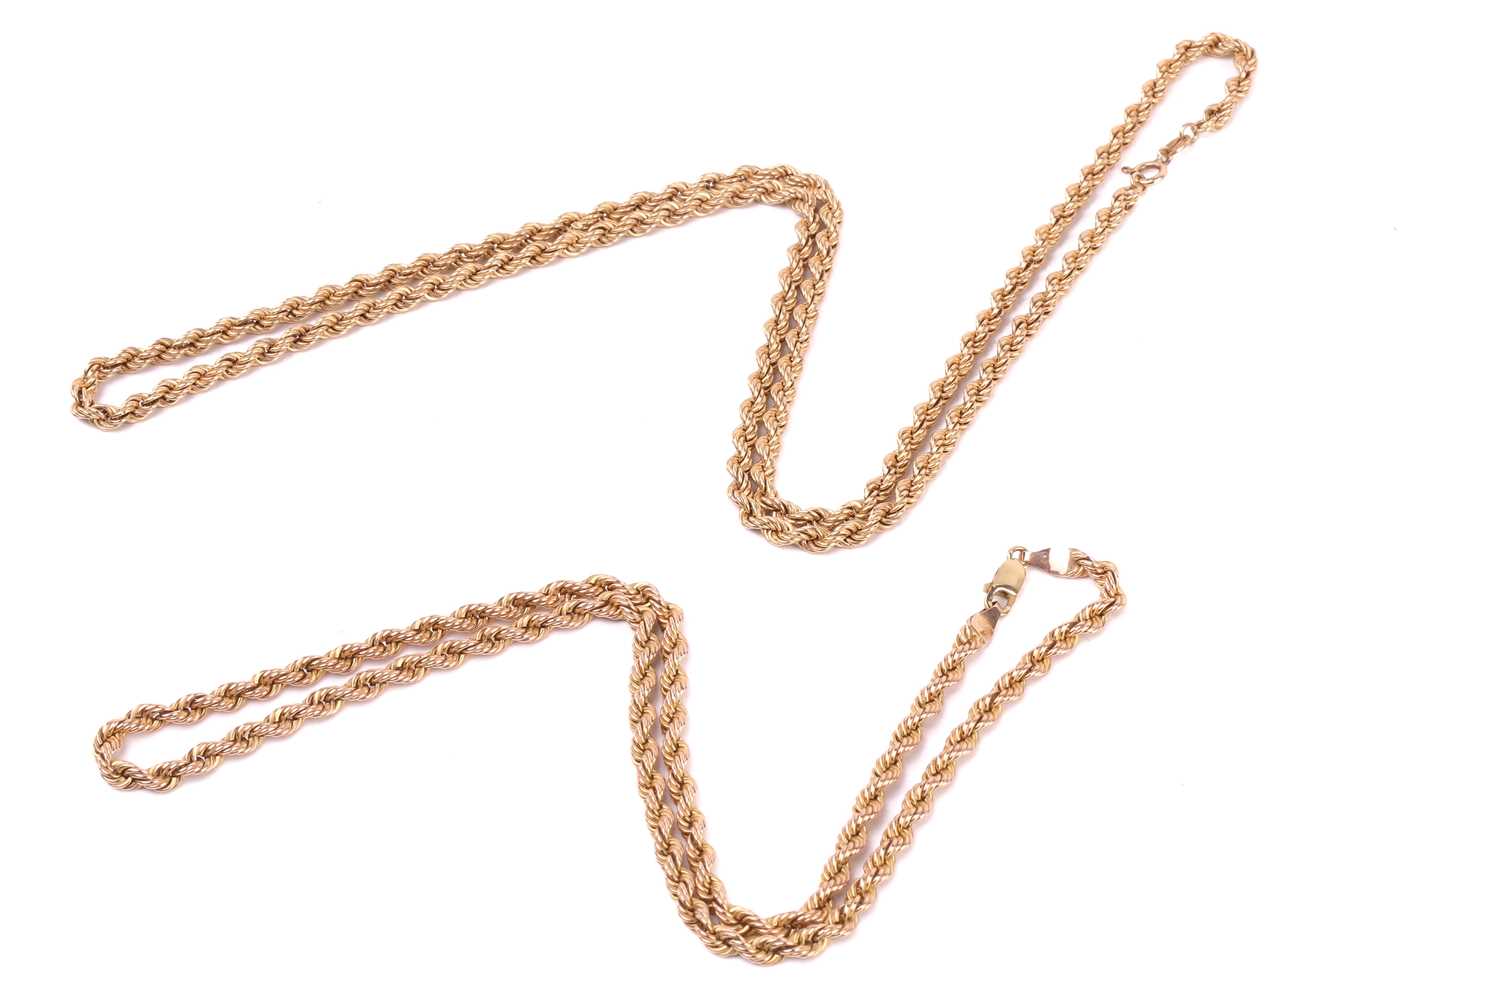 Two twisted rope chains in 9ct gold, one fastens with lobster clasp and the other with a spring-ring